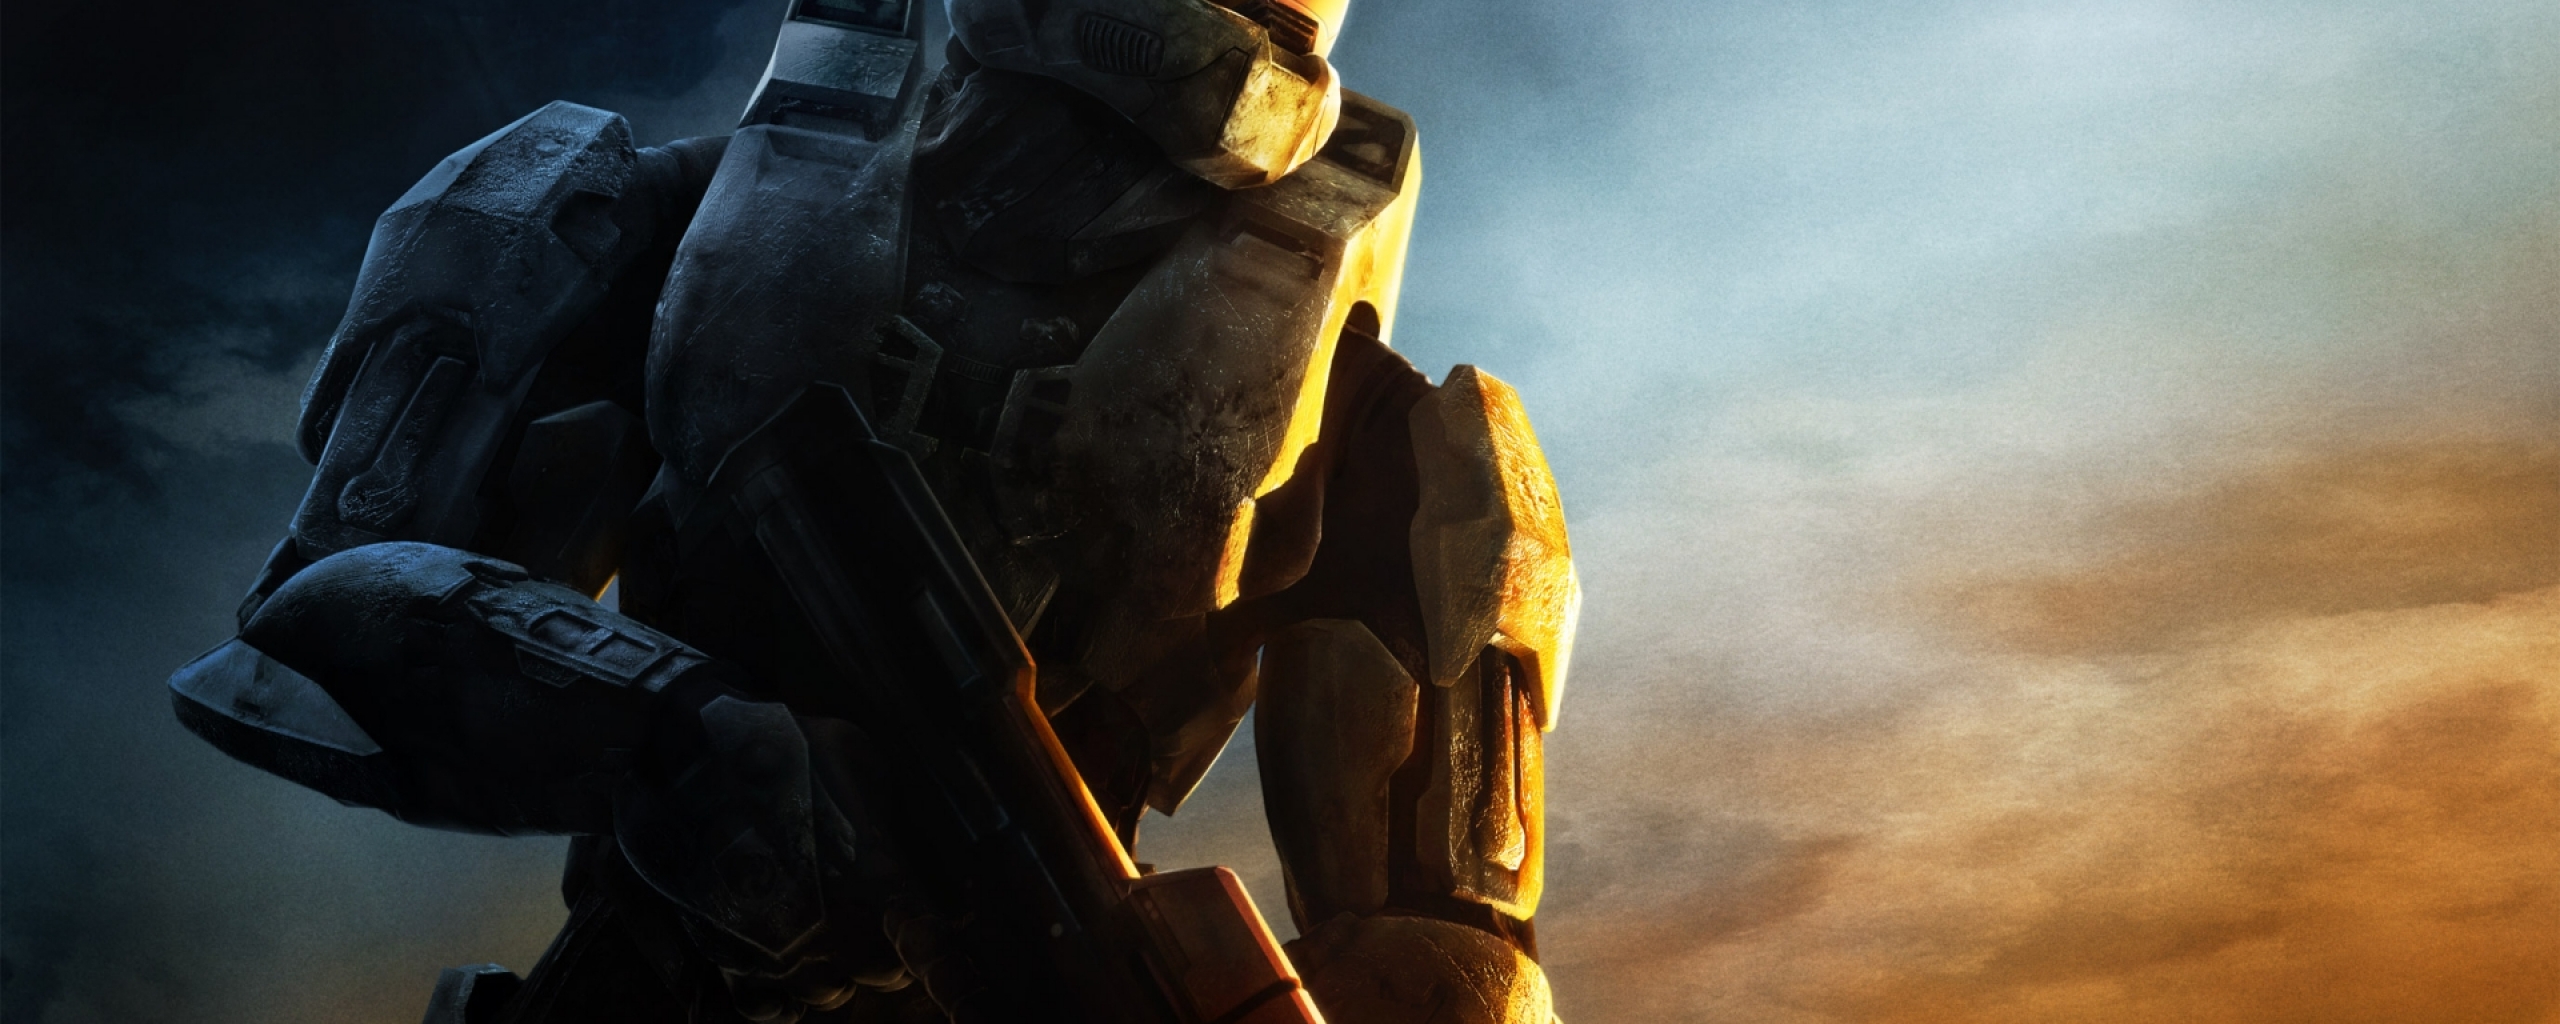 Halo, Soldier, Sunset, Full HD Wallpaper